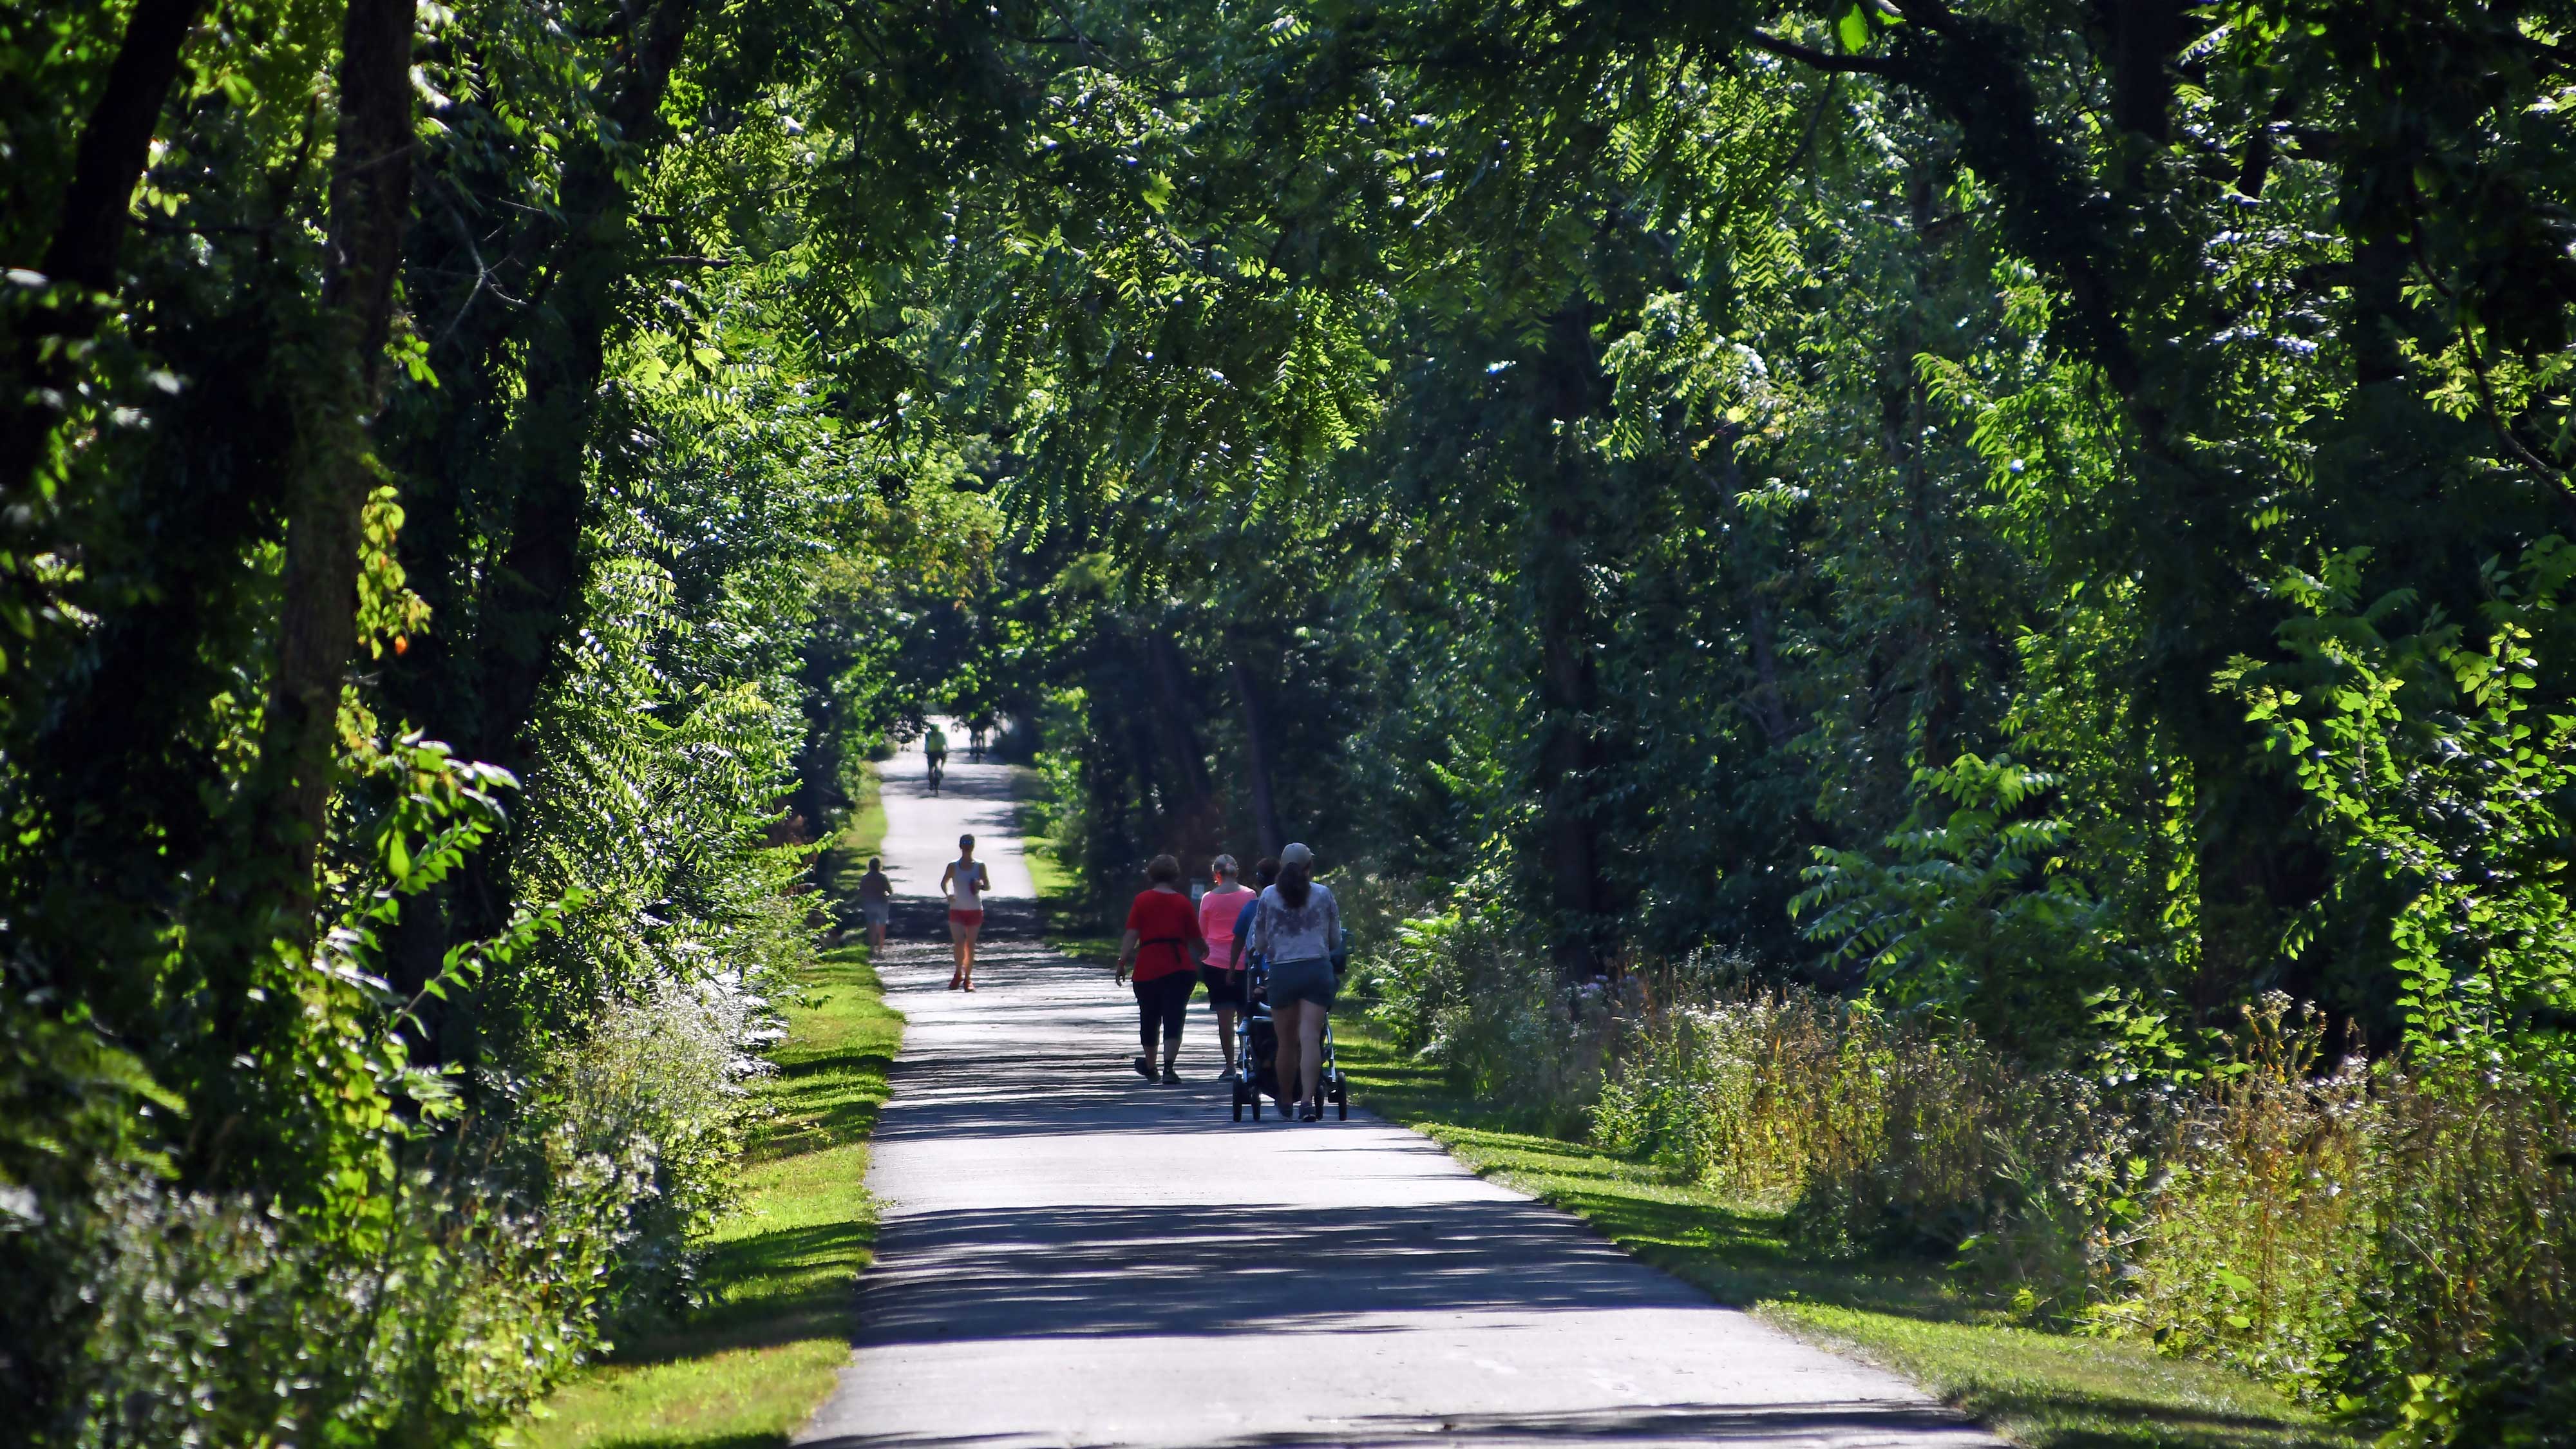 Trail users on the Old Plank Road Trail.